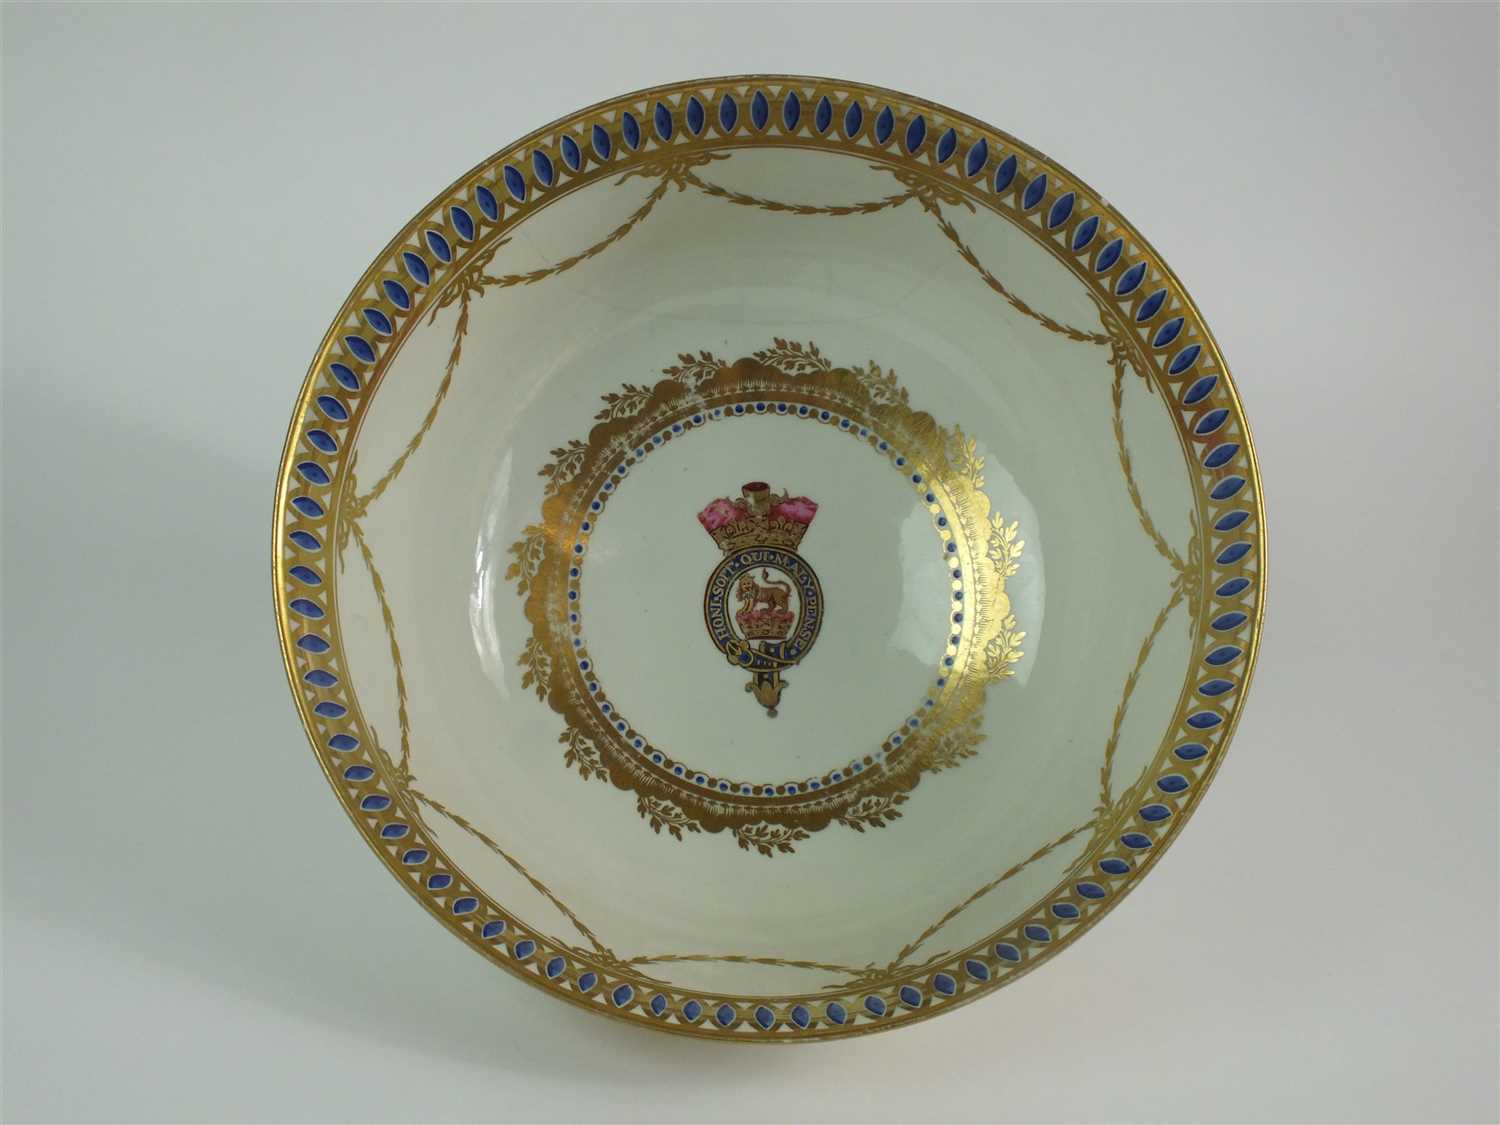 A rare Caughley polychrome George IV Prince of Wales punch bowl - Image 4 of 8